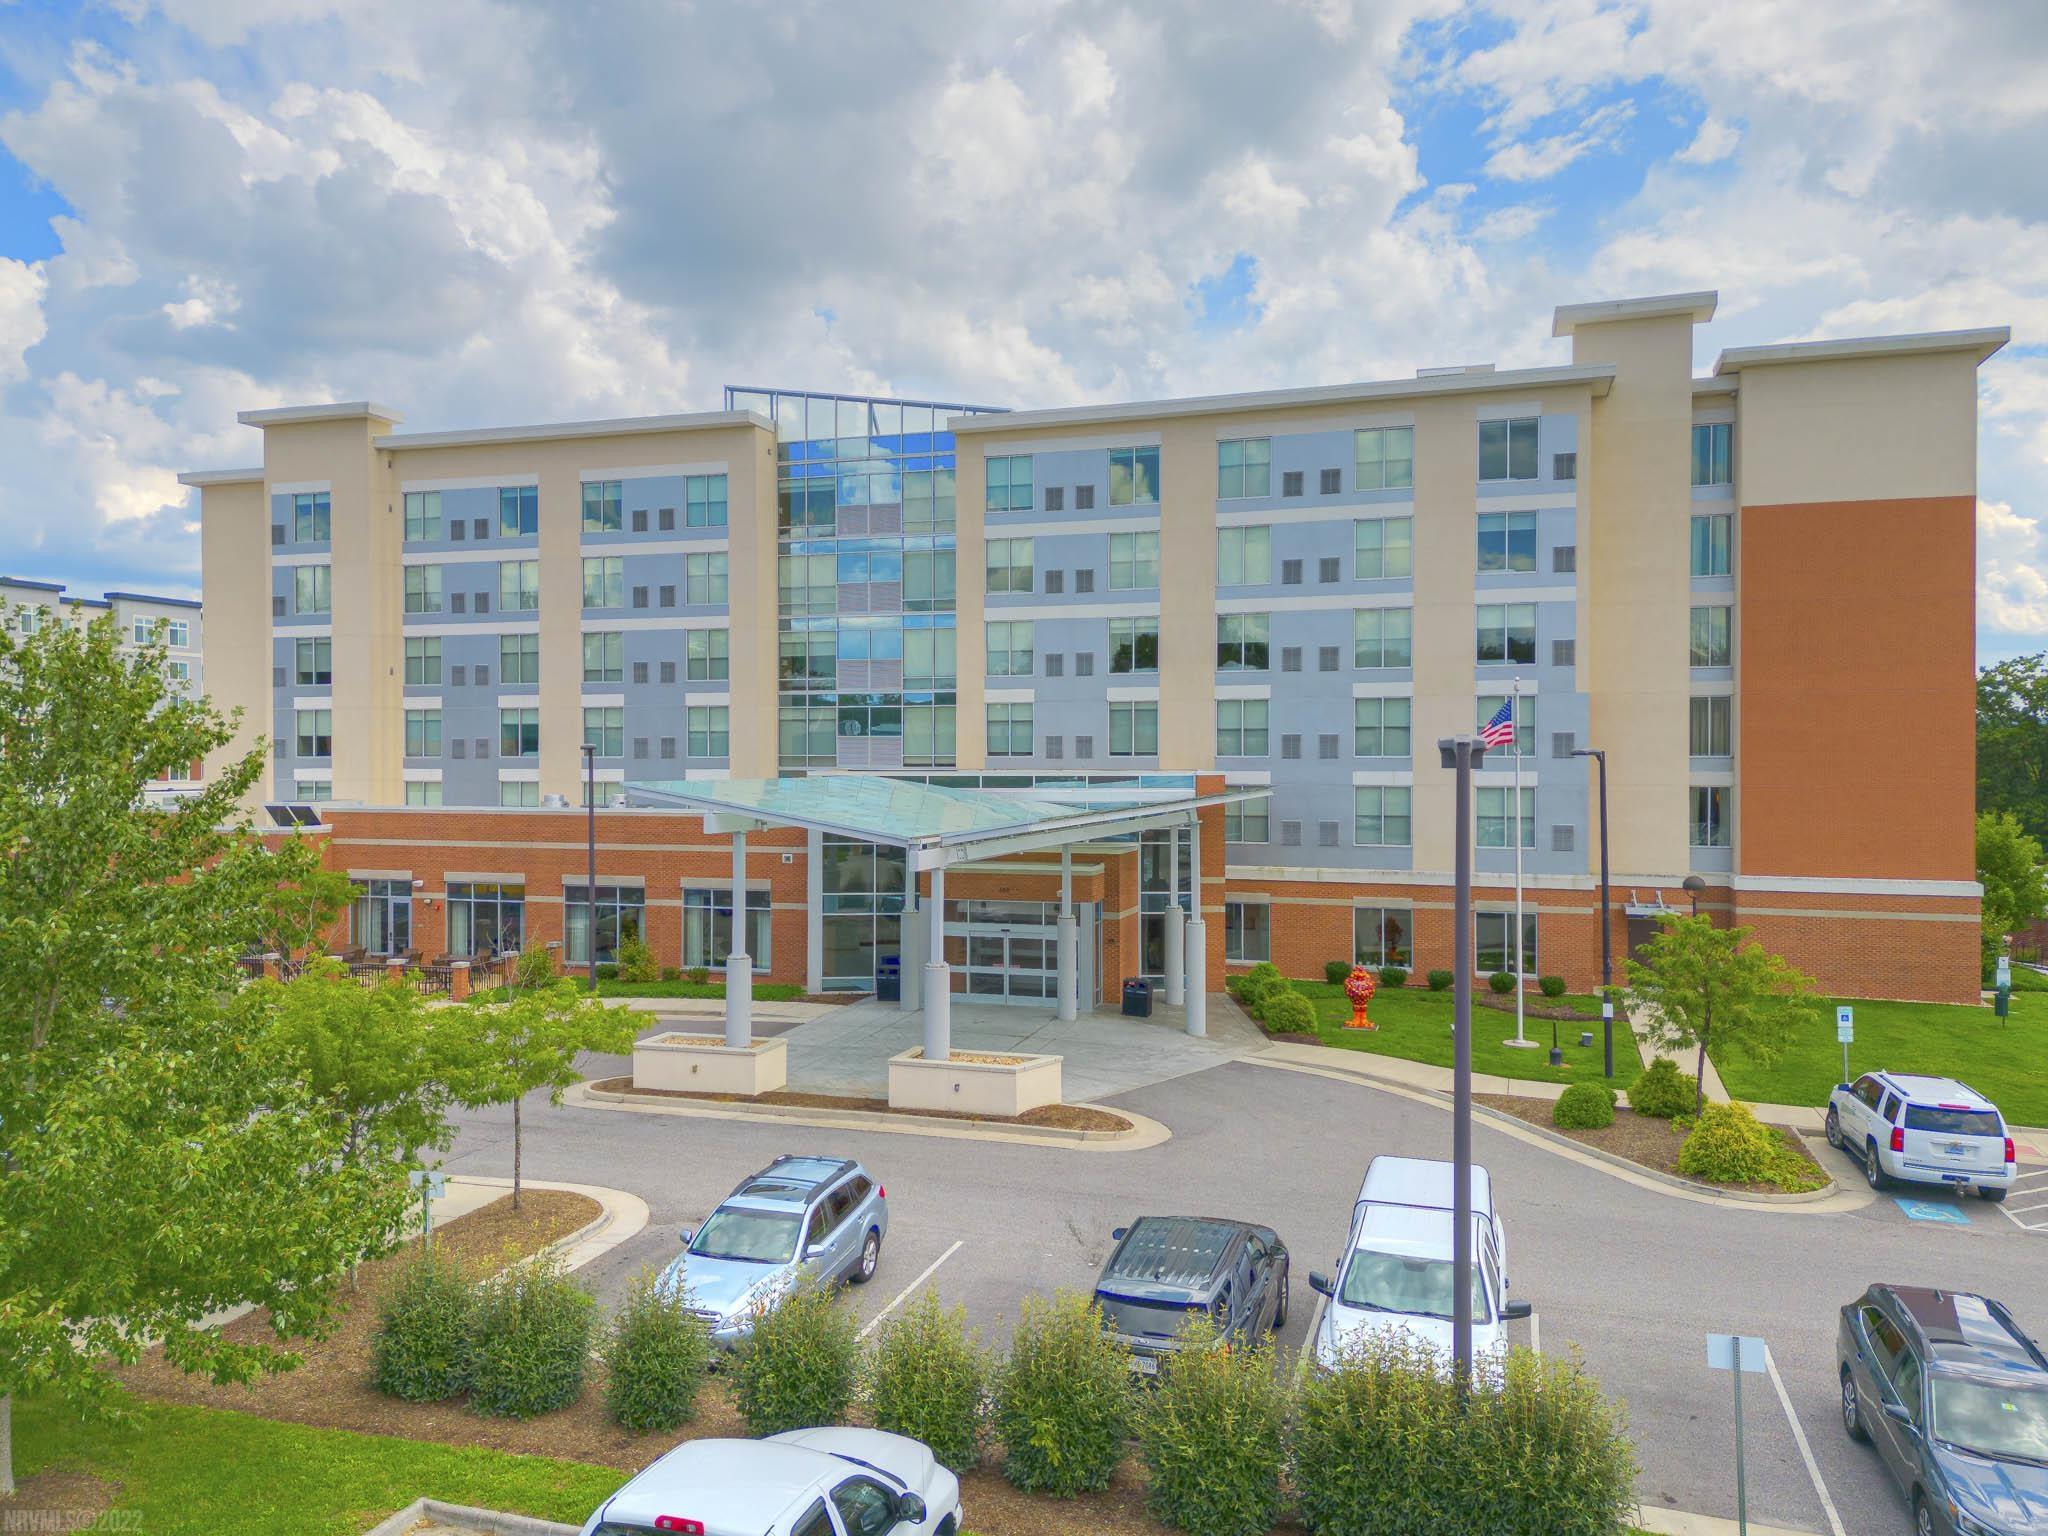 Own your own hotel room in a downtown Blacksburg hotel!  Built in 2017, this 2 Queen, full bath unit has great amenities and is walkable to many dining options and the VT campus.  Visit Blacksburg while owning an appreciating asset and generating modest cash flow.